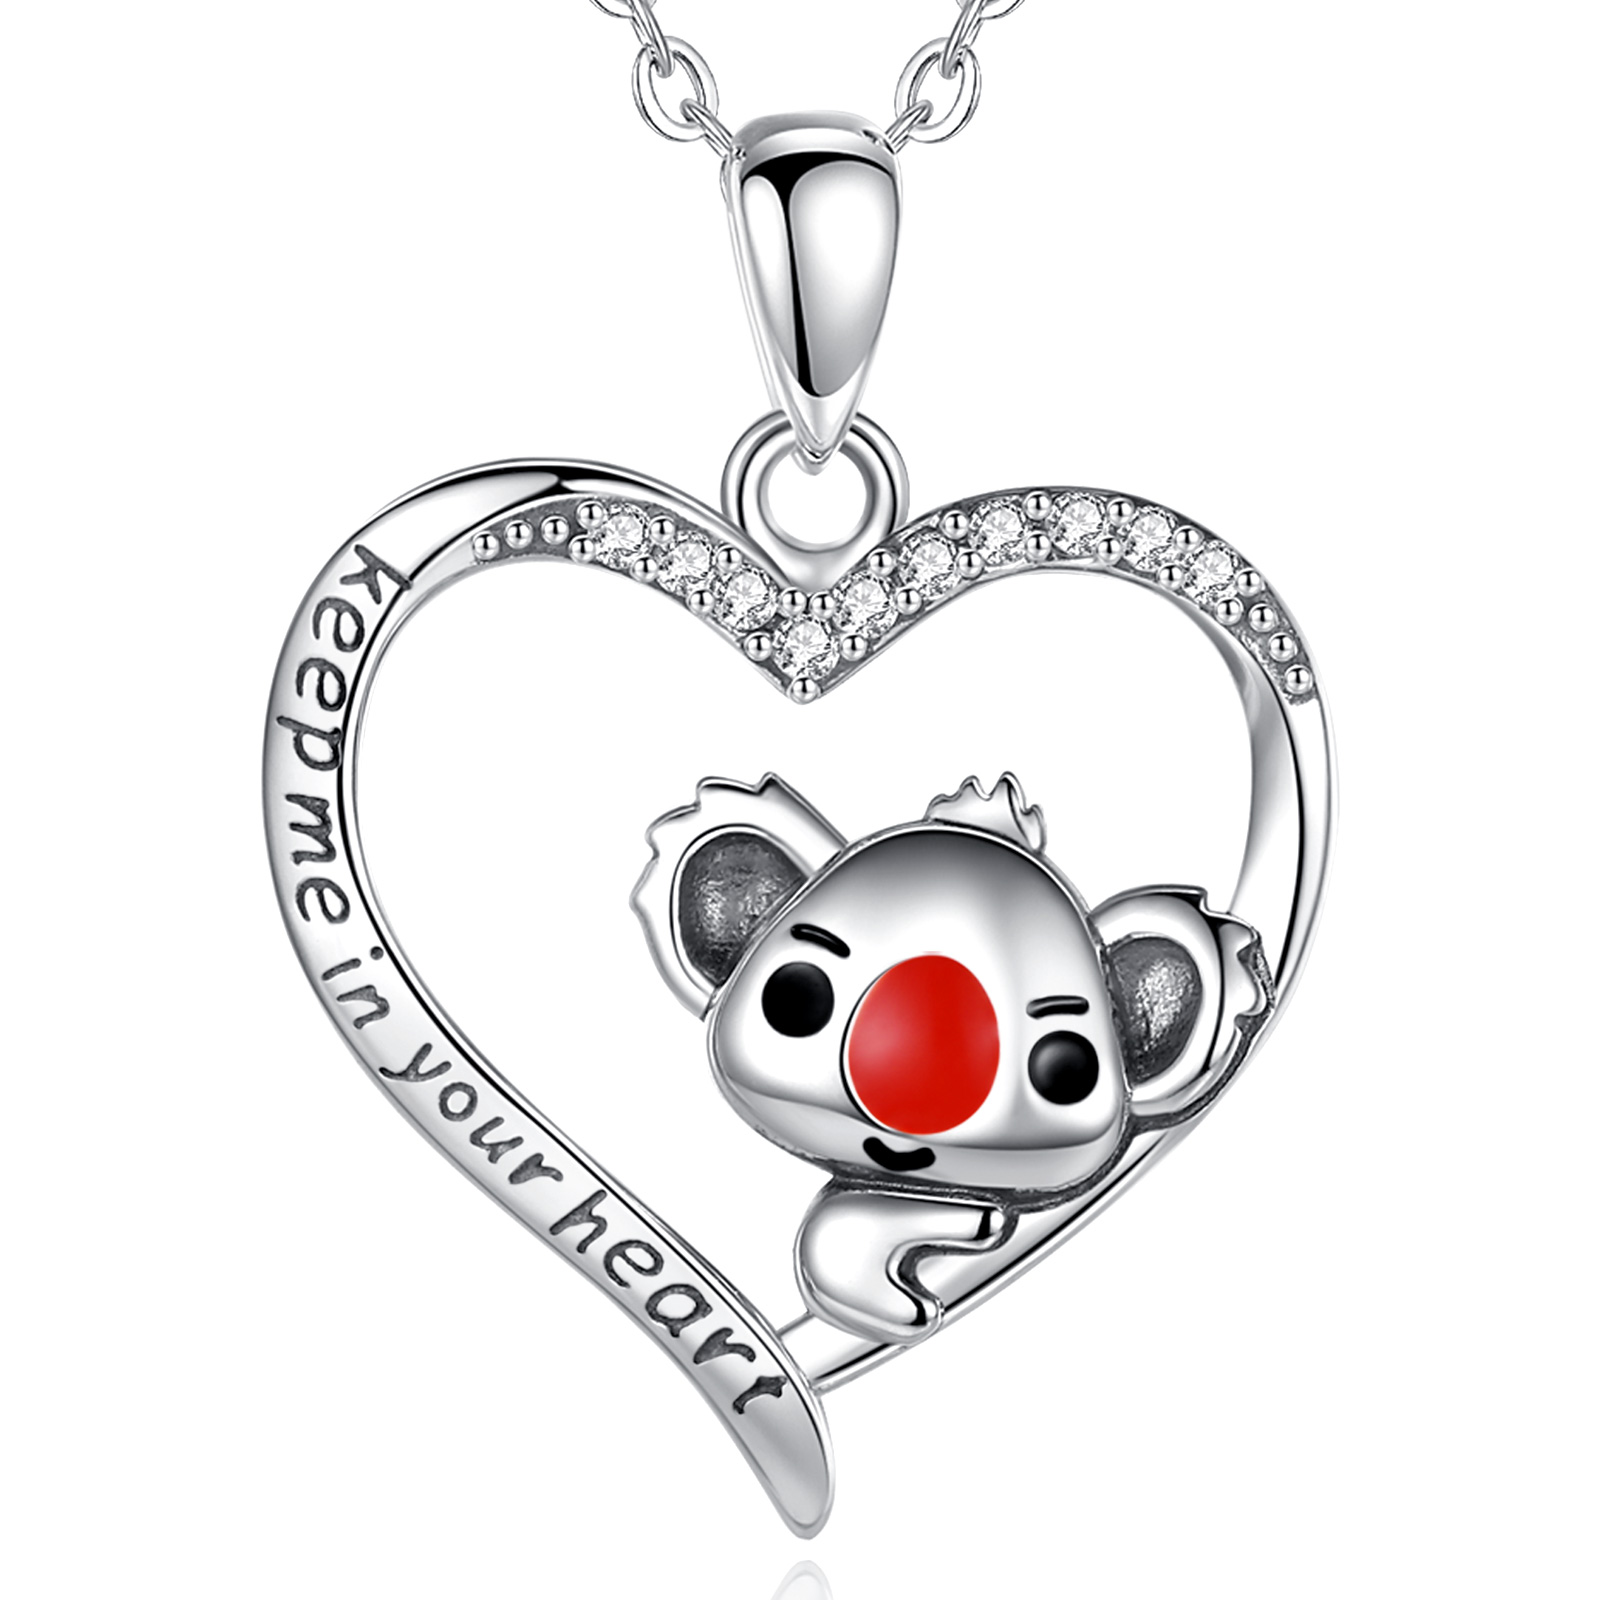 Merryshine Wholesale Jewelry 925 Sterling Silver Heart Shaped and Koala Animal Necklace for Women